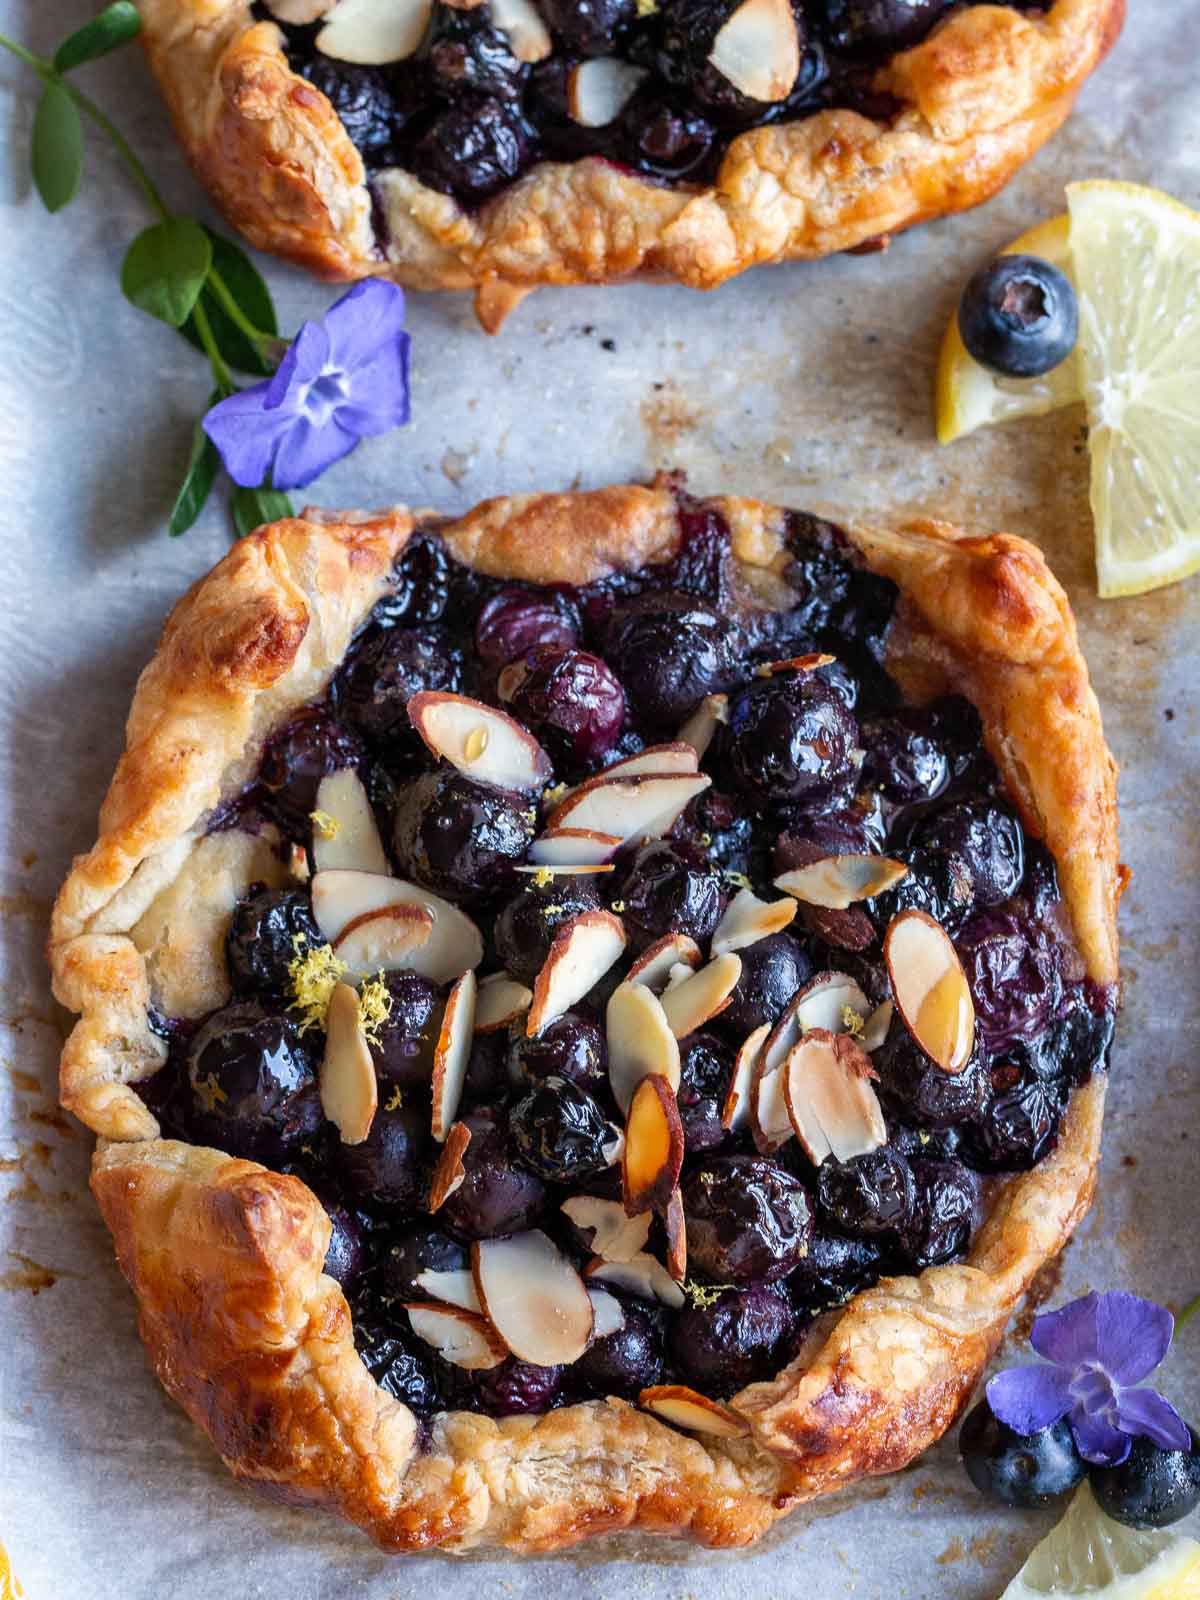 blueberry tart made with puff pastry showing the toasty almonds and bursting delicious blueberries.